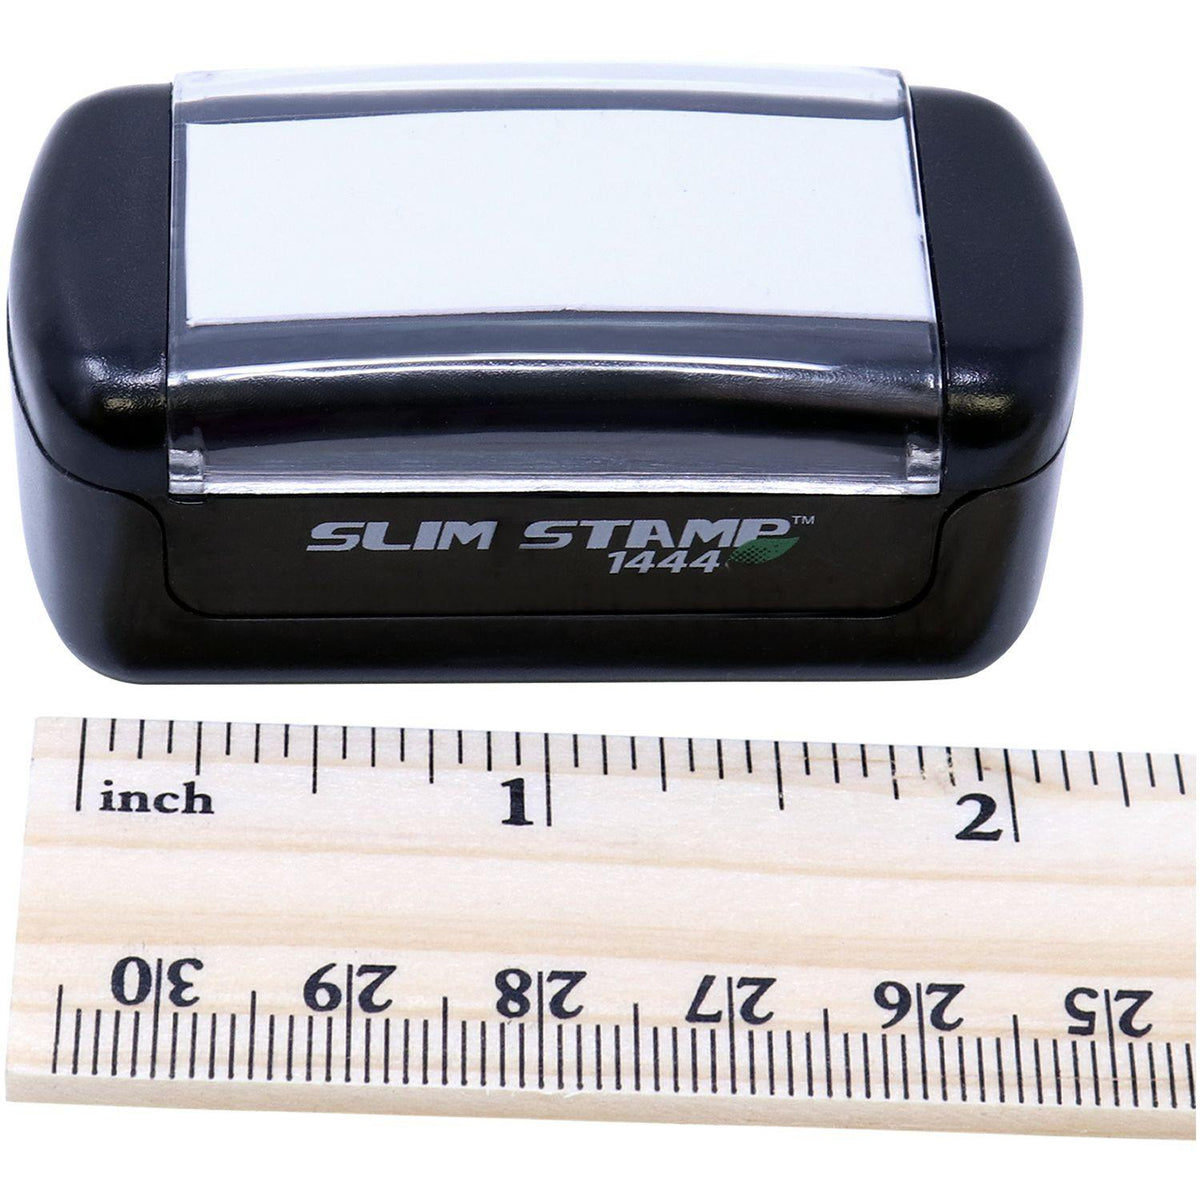 Measurement Slim Pre-Inked Faxed on Stamp with Ruler